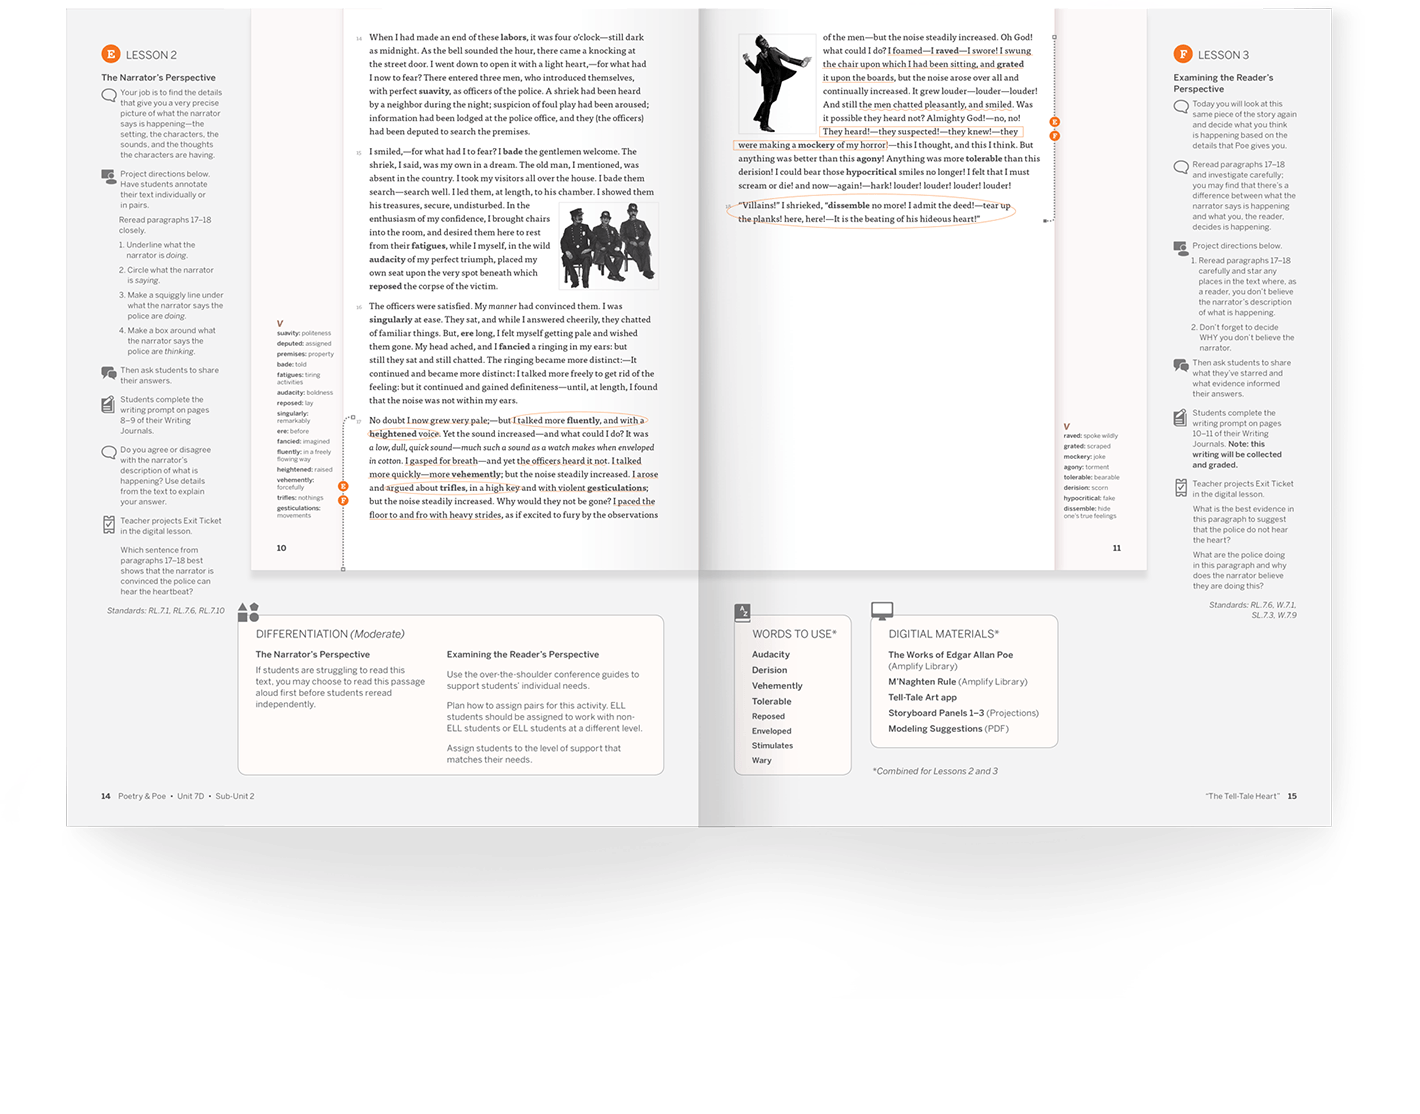 Open textbook displaying two pages with text and images, including diagrams, charts, and small photos of people, used for educational purposes.